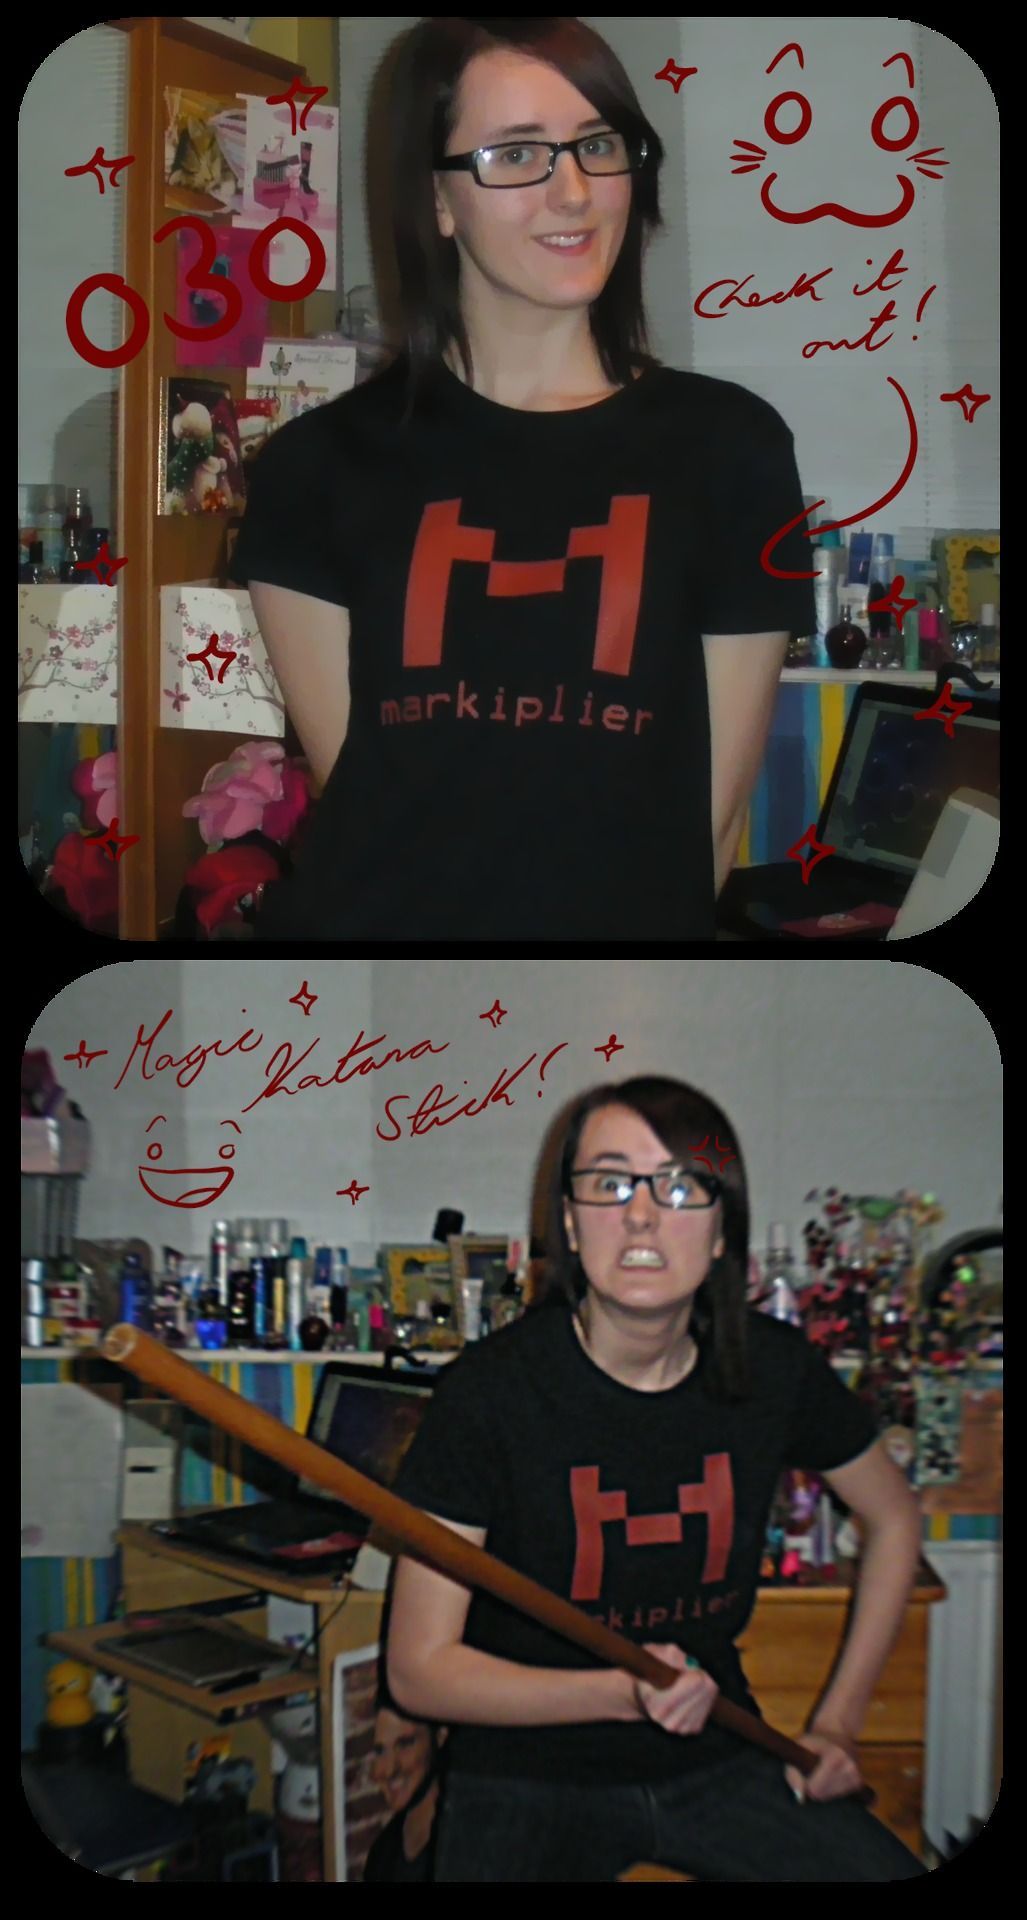 lilmisstash:  Yaay, bought a Markiplier t-shirt to show my support! =) I also decided